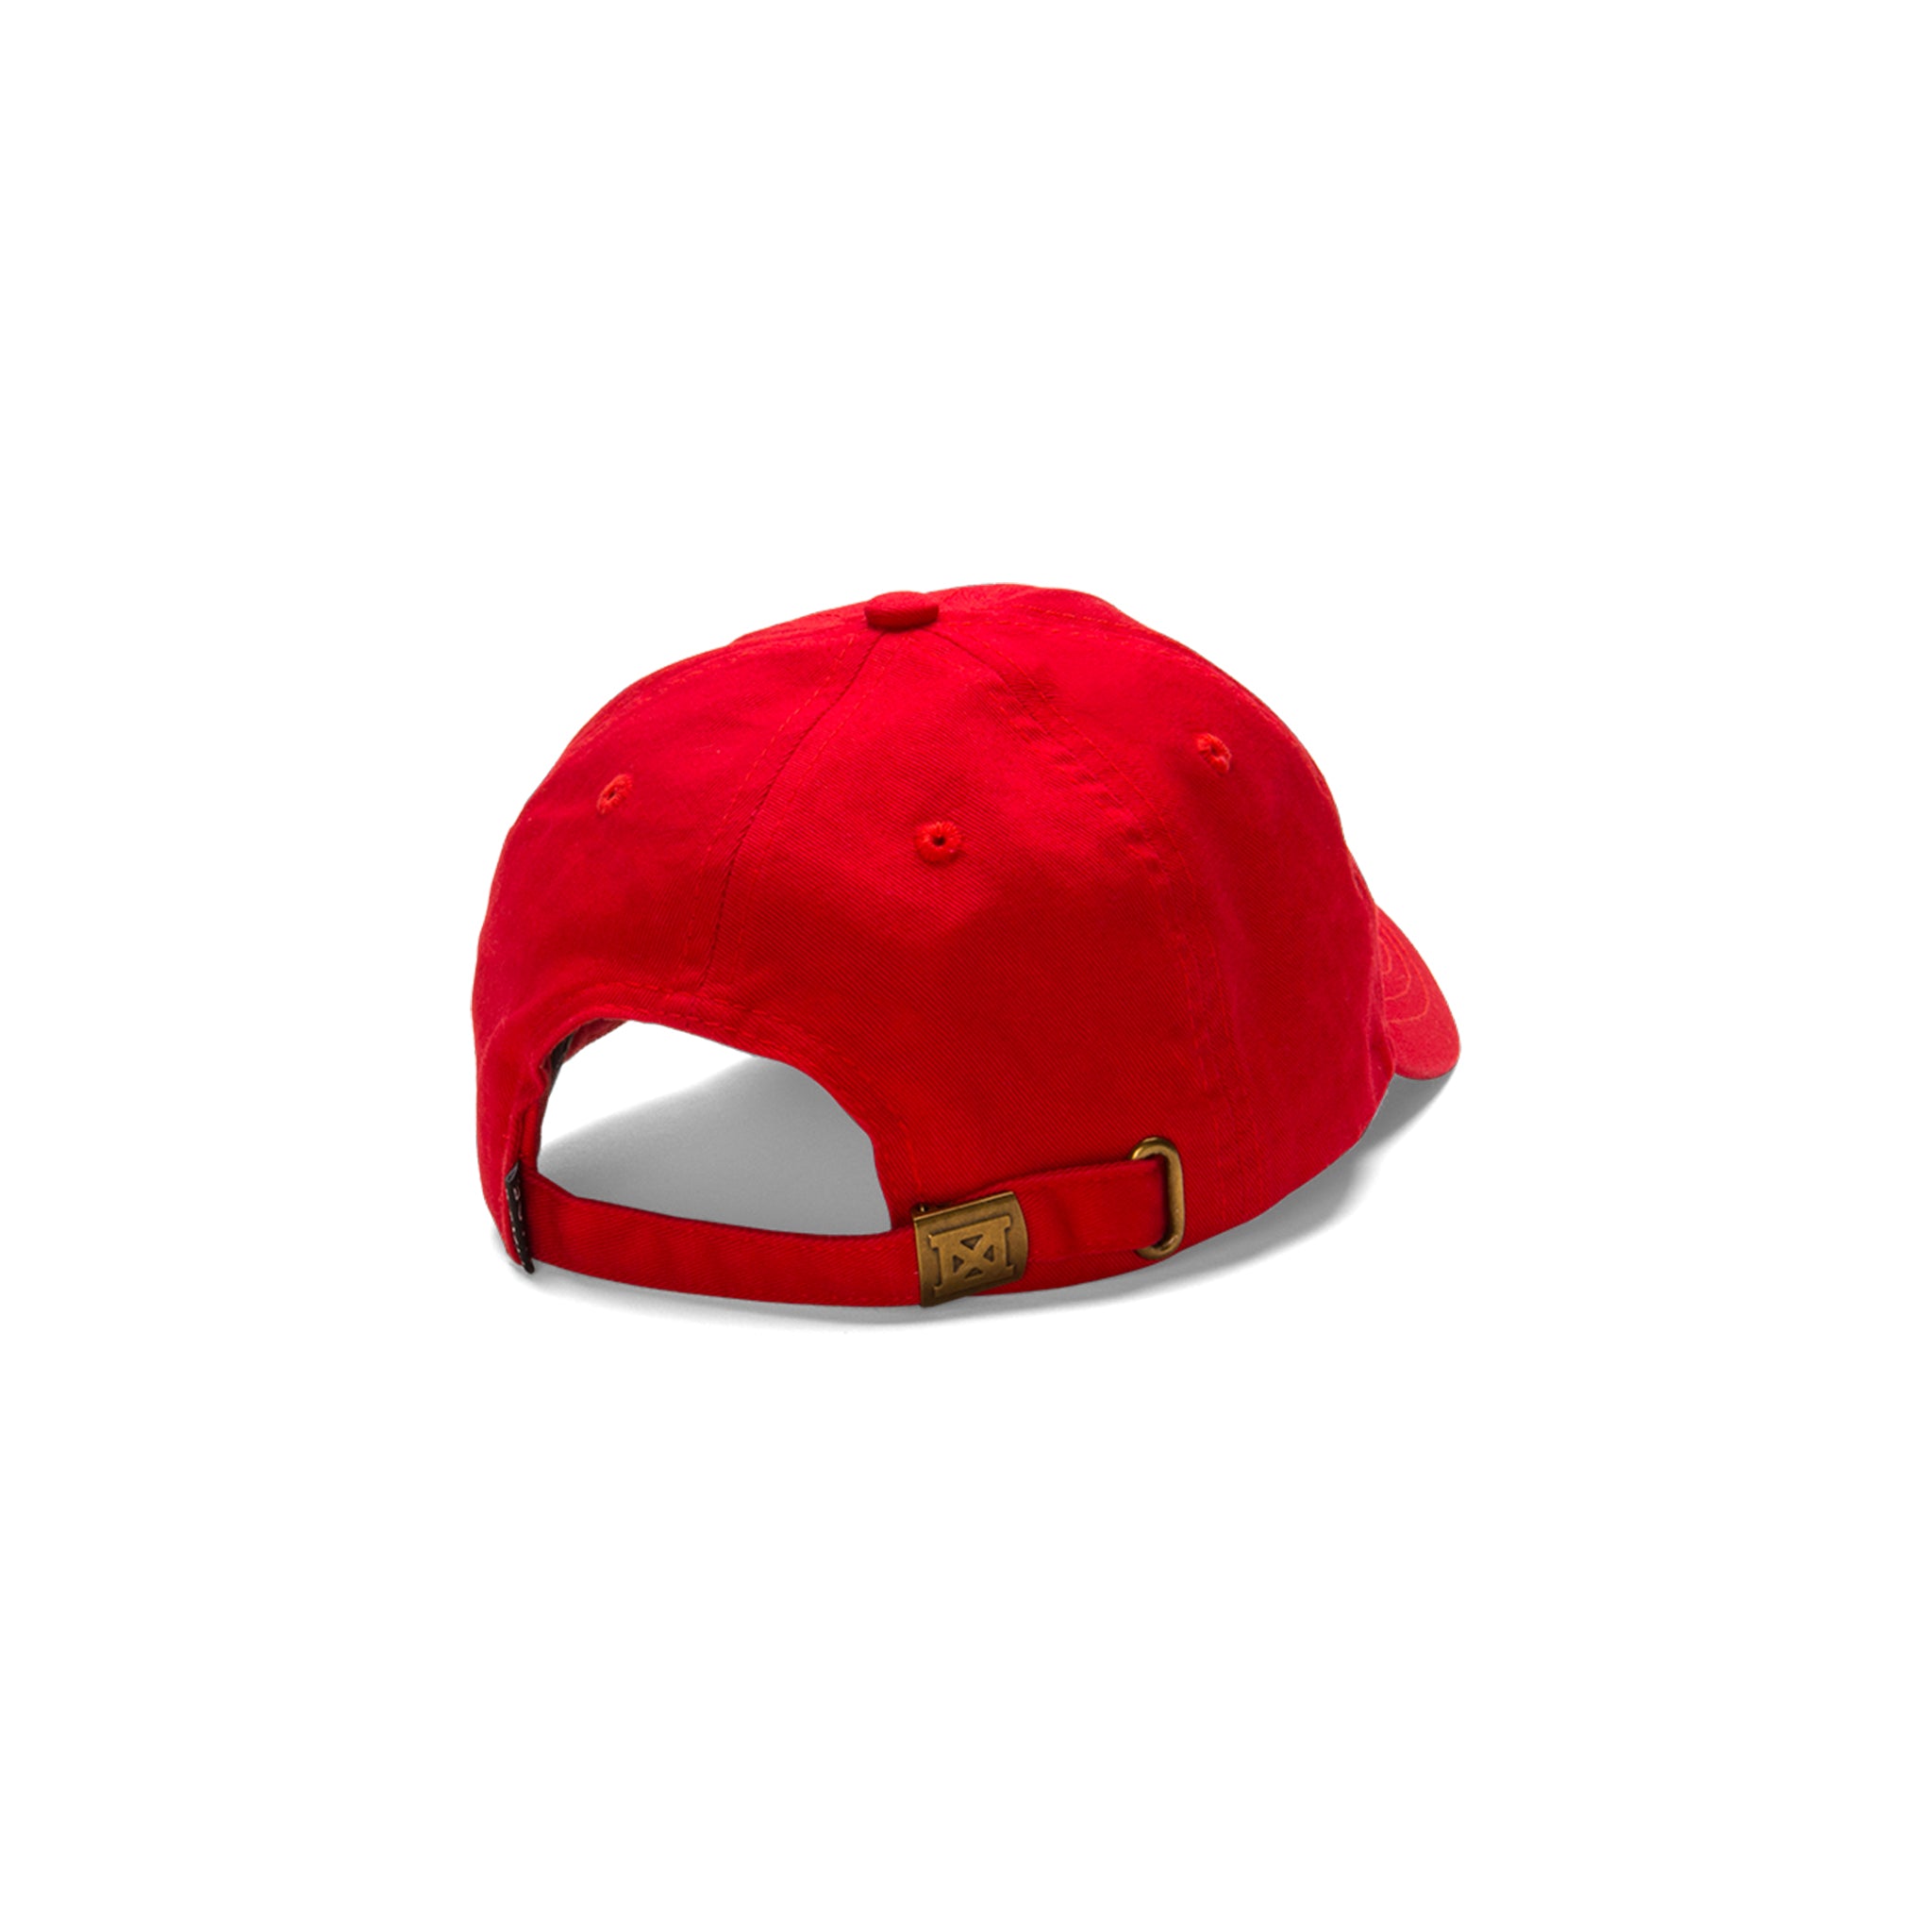 Signature KC Dad Hat - Red